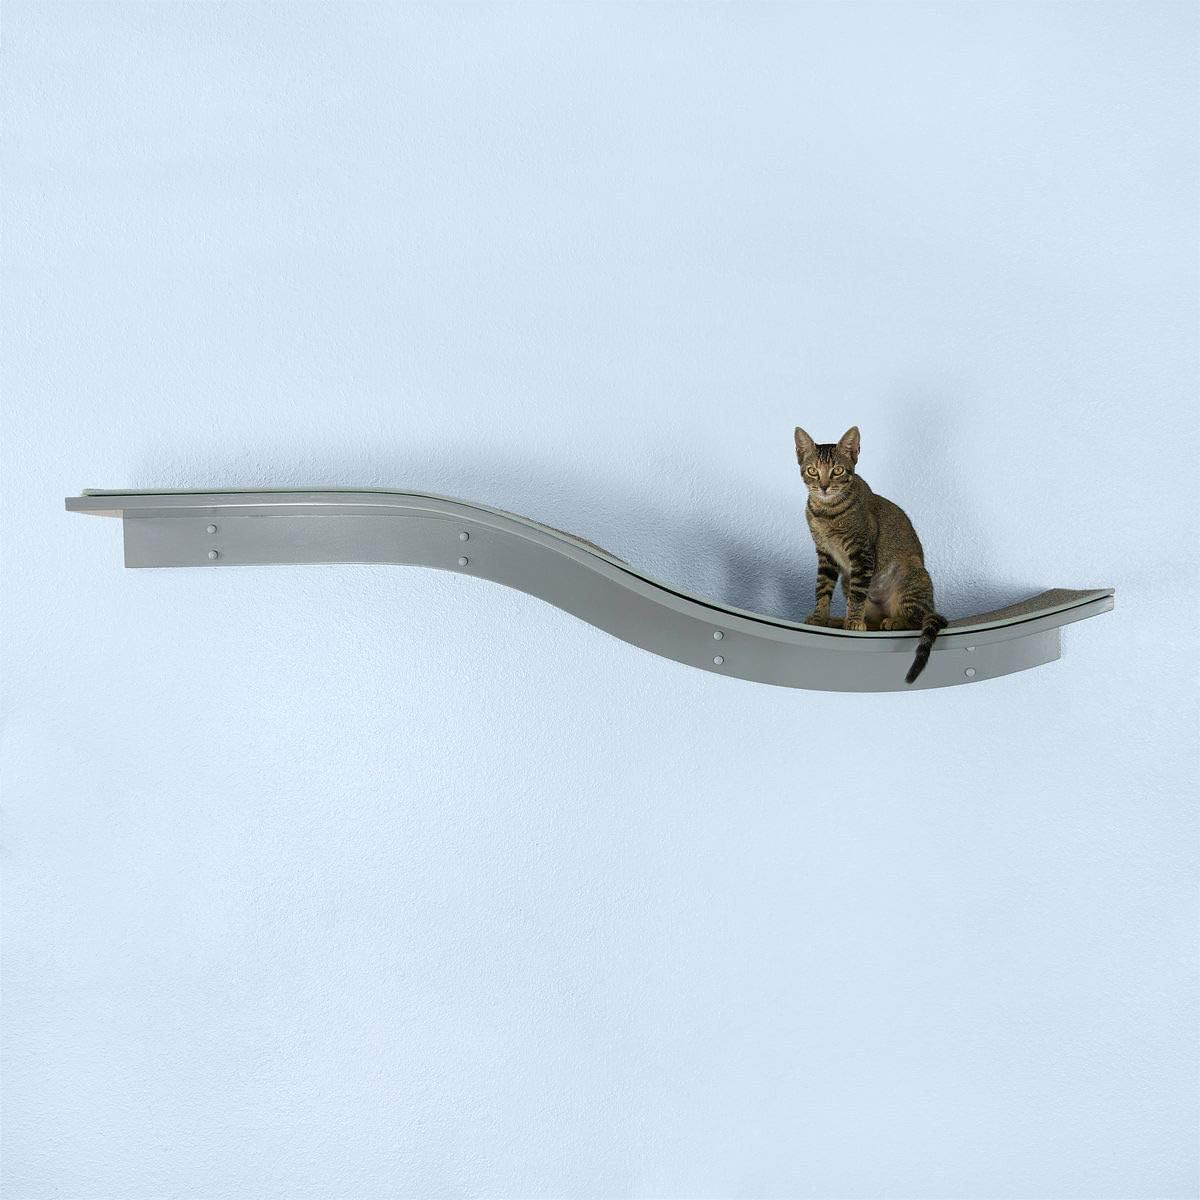 THE REFINED FELINE 60 Inch Lotus Branch Cat Shelf in Smoke Gray with Replaceable Carpet, Playing, Climbing, & Lounging Cat Shelves And Perches For Wall, Cat Hammock Bed Furniture for Large Cats New